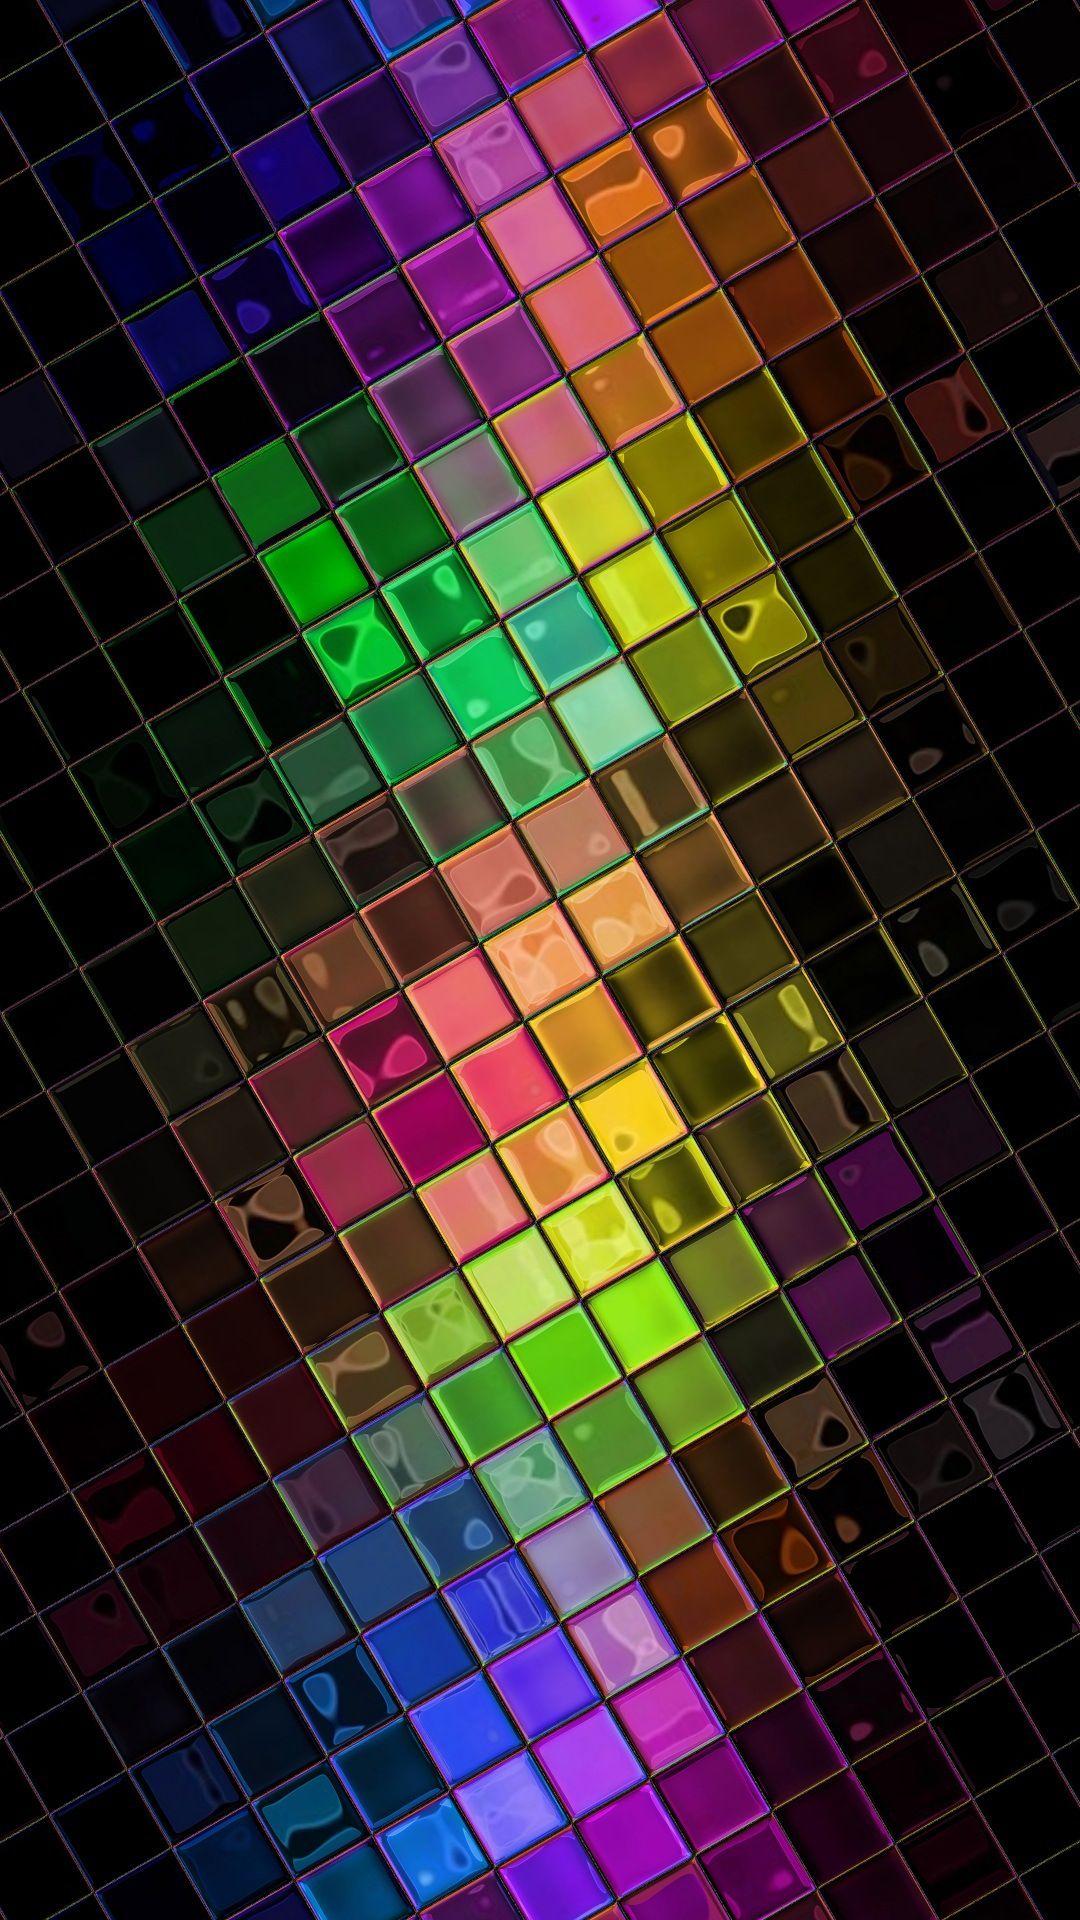 HD Squares Disco Ball Android Wallpaper free download